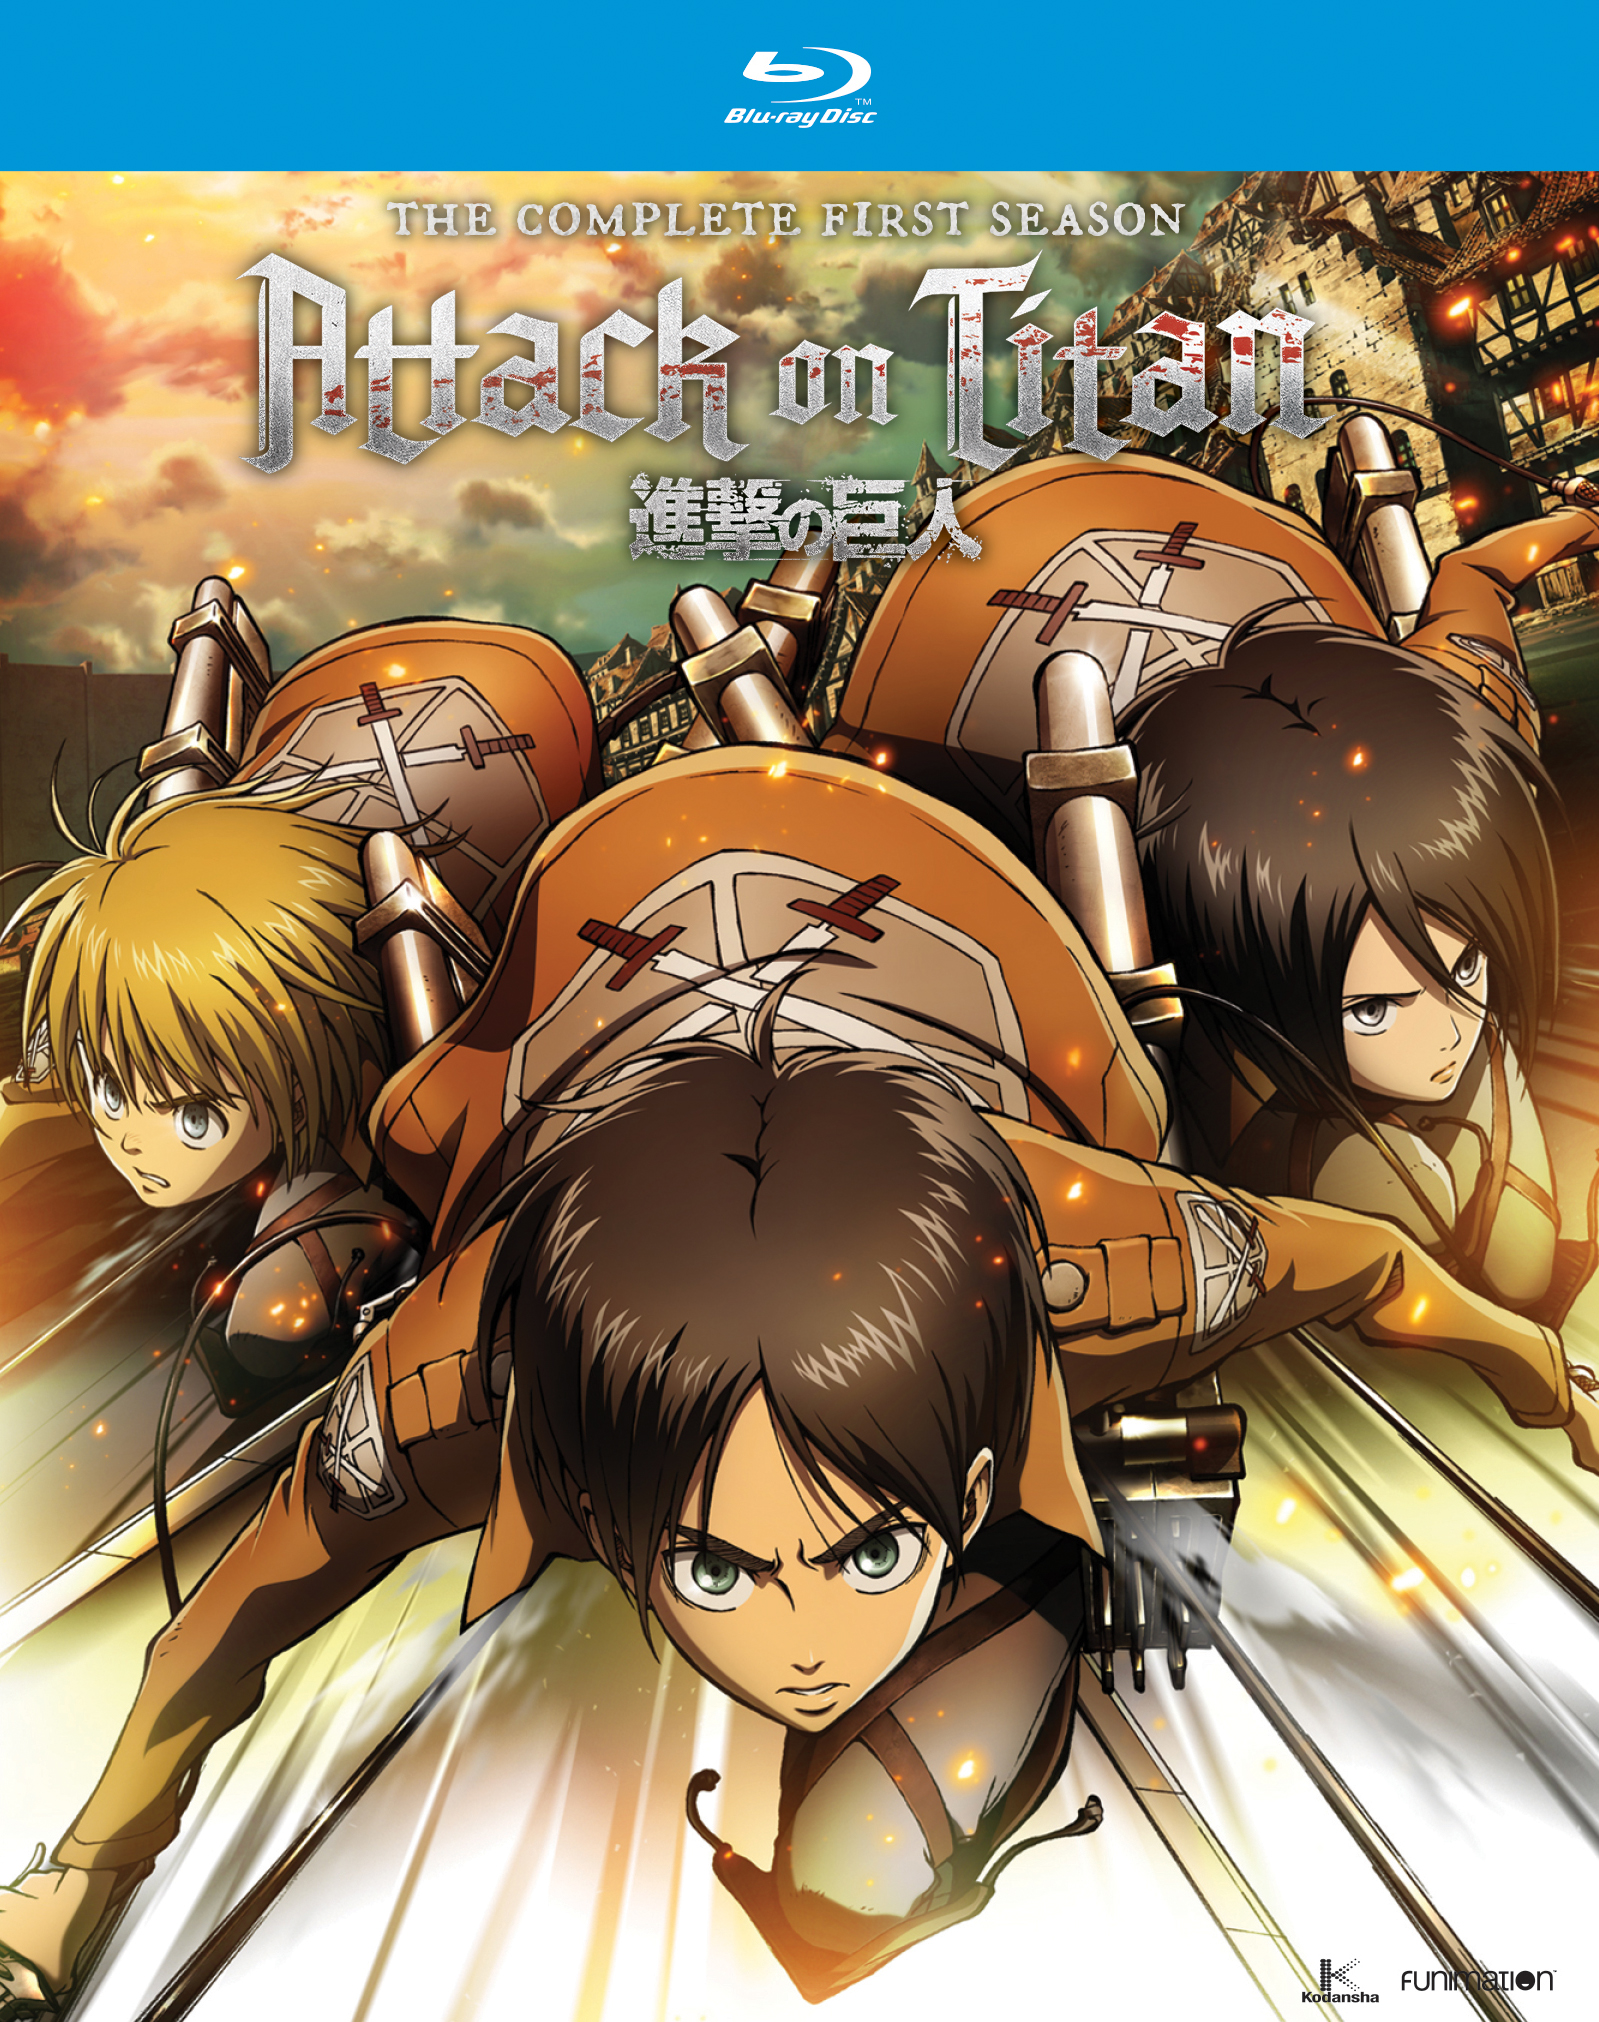  Attack on Titan: Final Season - Part 2 - Limited Edition  Blu-ray + DVD : Various, Various: Movies & TV